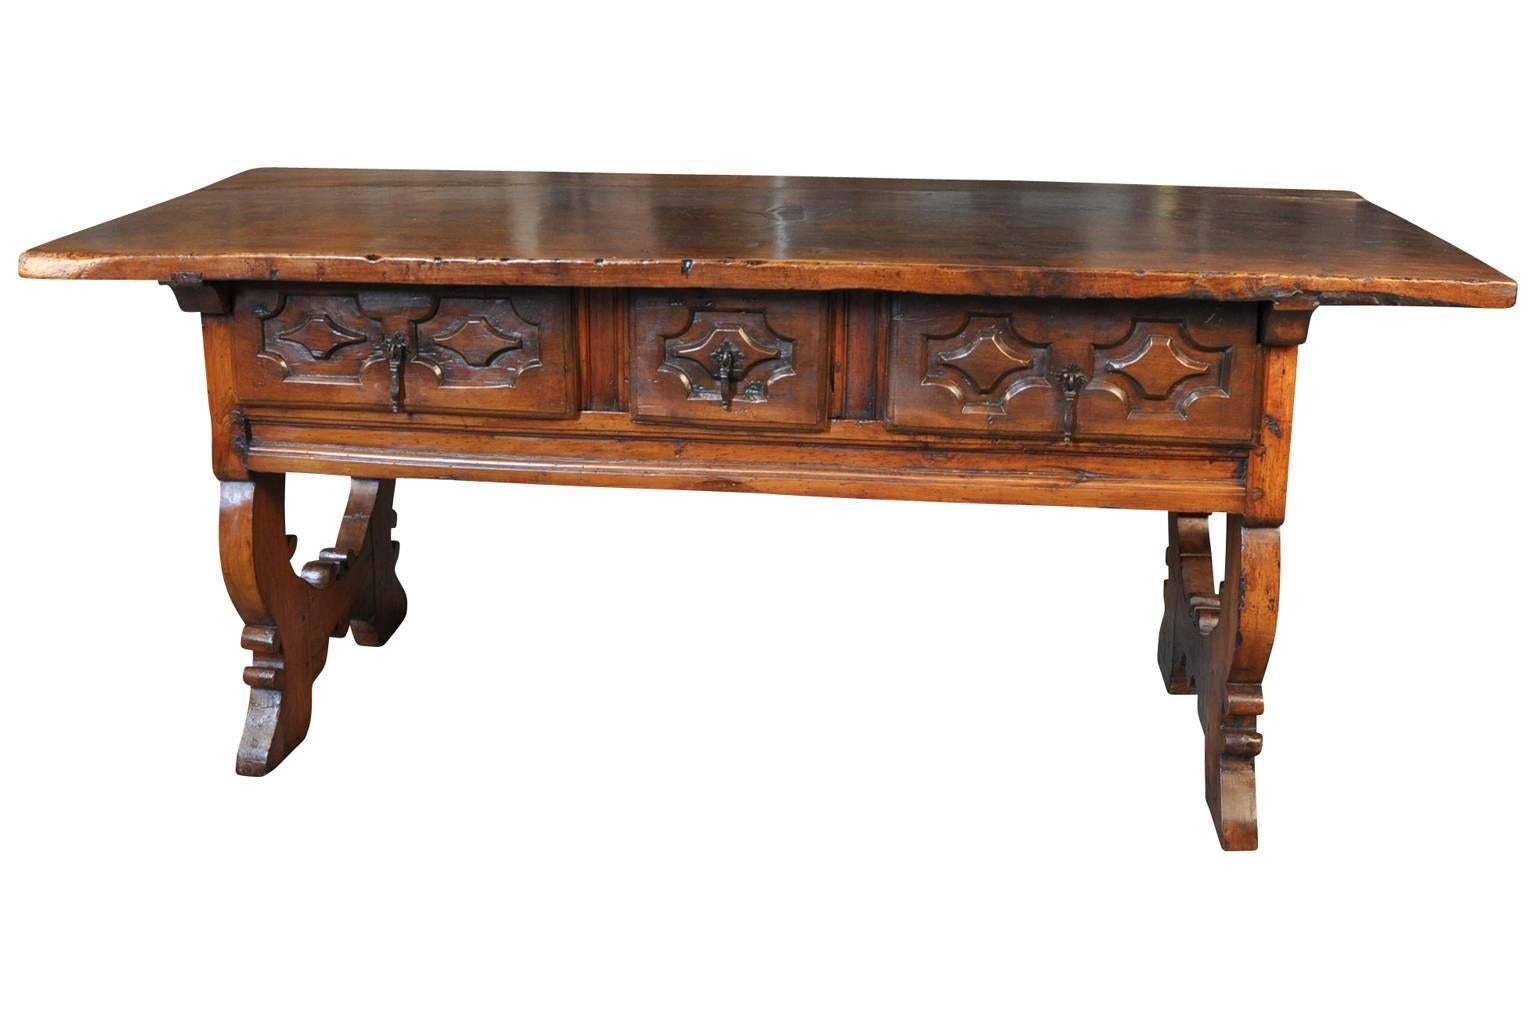 A very handsome 18th century table or desk from the Catalan region of Spain. Beautifully constructed from walnut with three drawers and wonderfully shaped legs. Perfect as a console or sofa table as well.